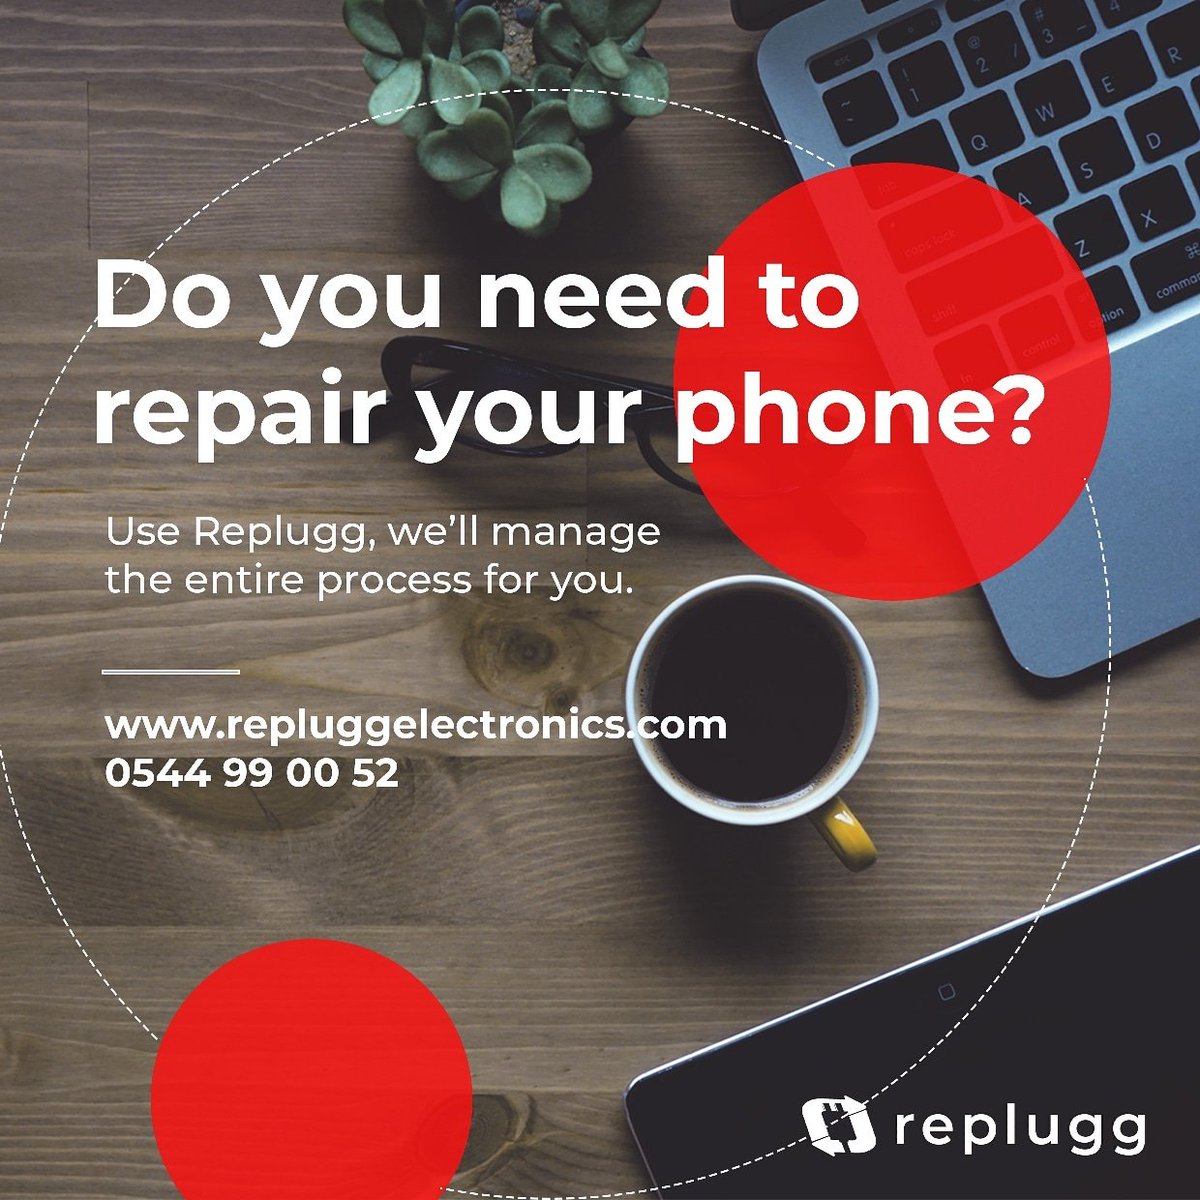 Is your phone faulty? 
Make a repair request through any of our portals and have your device repaired in 24 hours.
Stay connected the Replugg way! 
#phonerepairs #ITGh #convenientrepairs
 #screenreplacement #samedayfix  #pluggers #Replugg #Reconnect